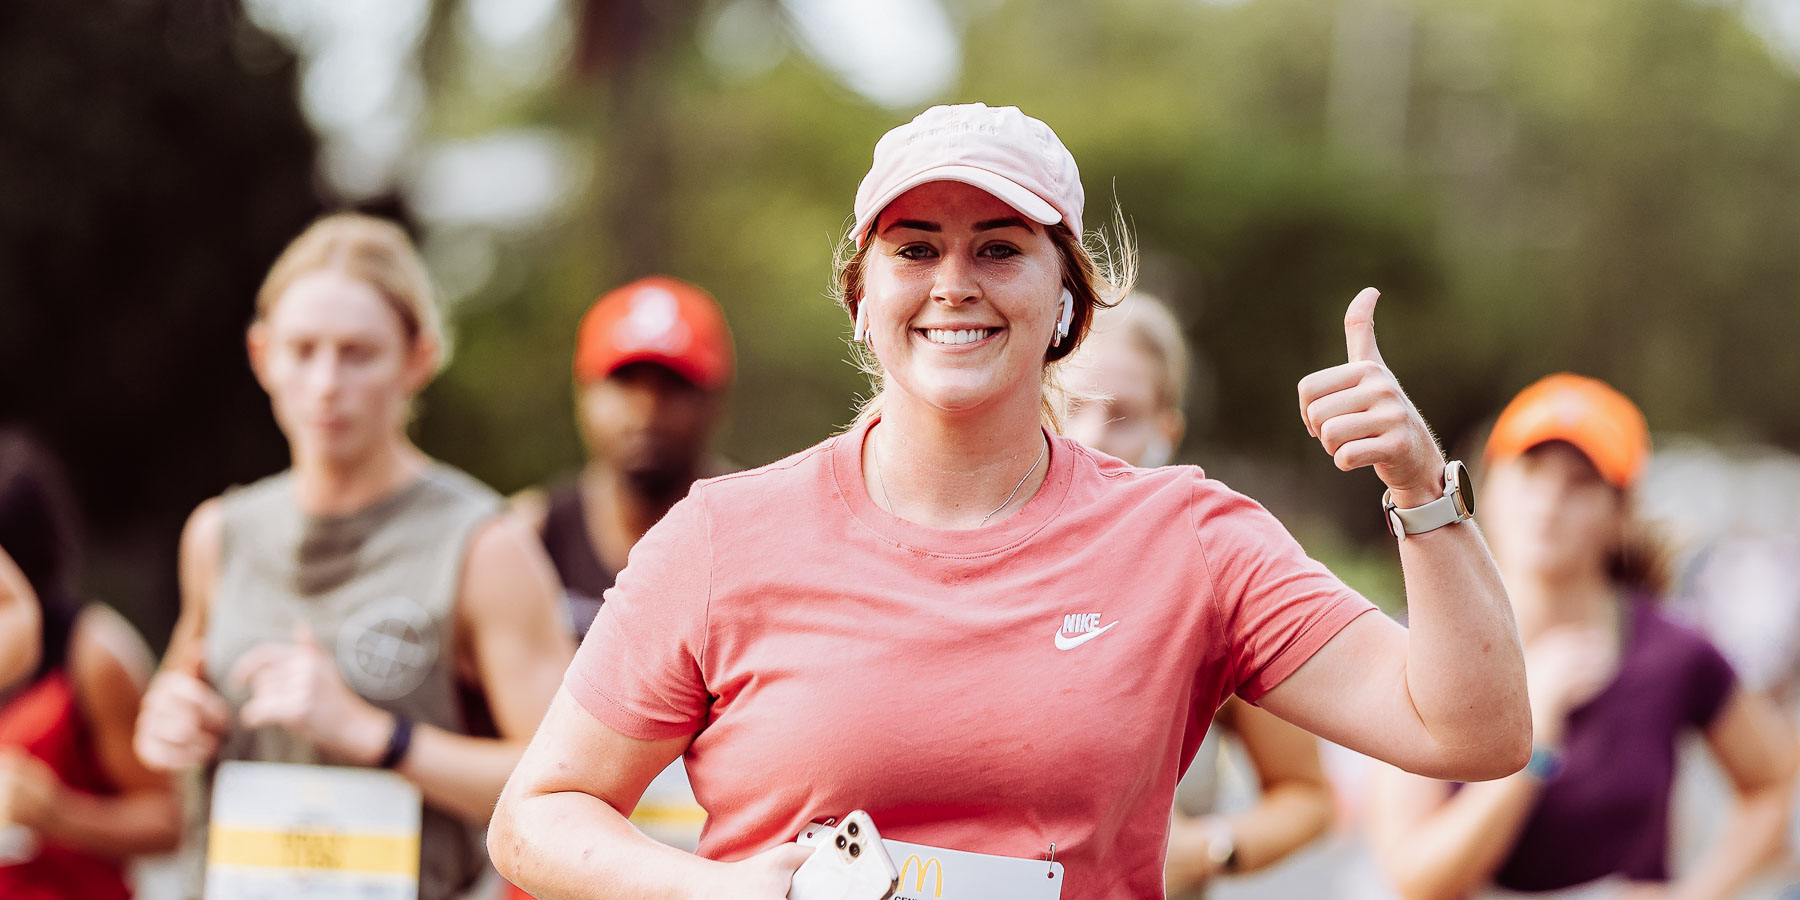 Woman giving thumbs up while running in charity run in Rockhampton